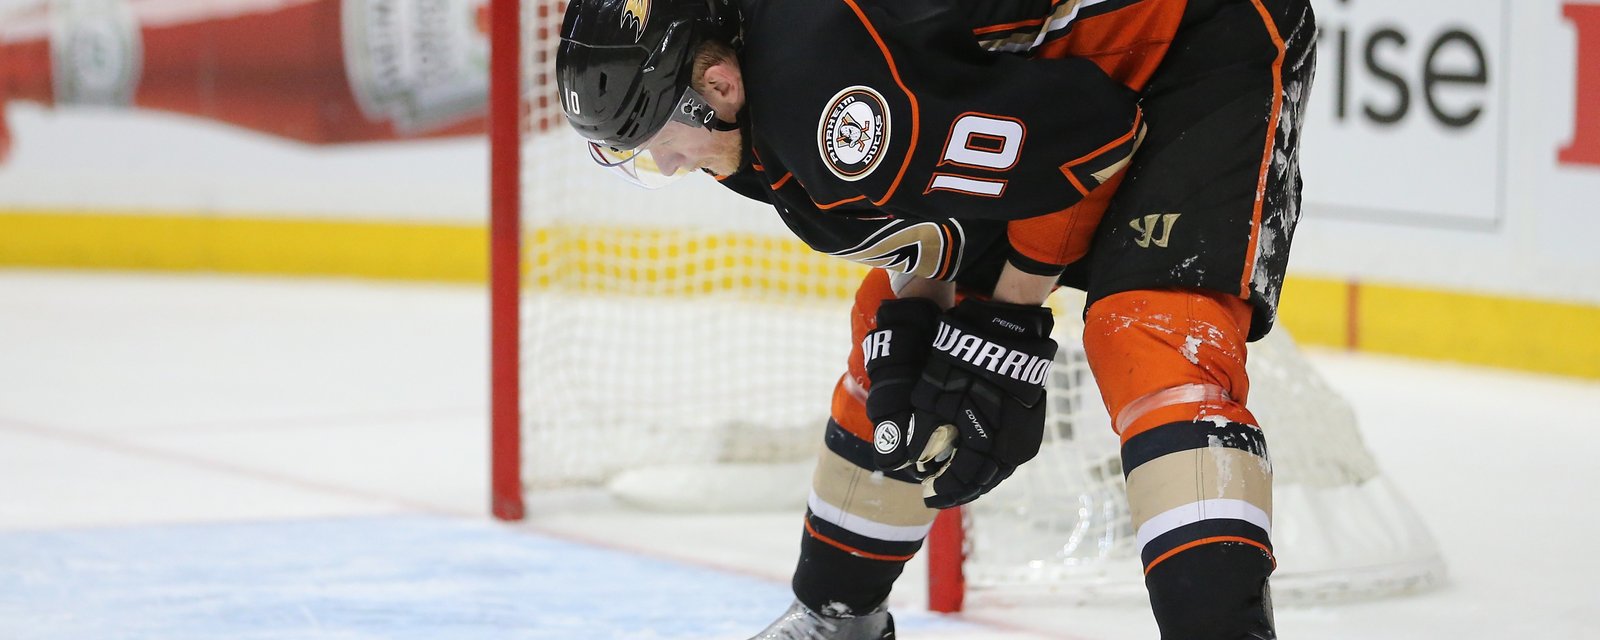 Breaking: The worst is confirmed for Corey Perry!